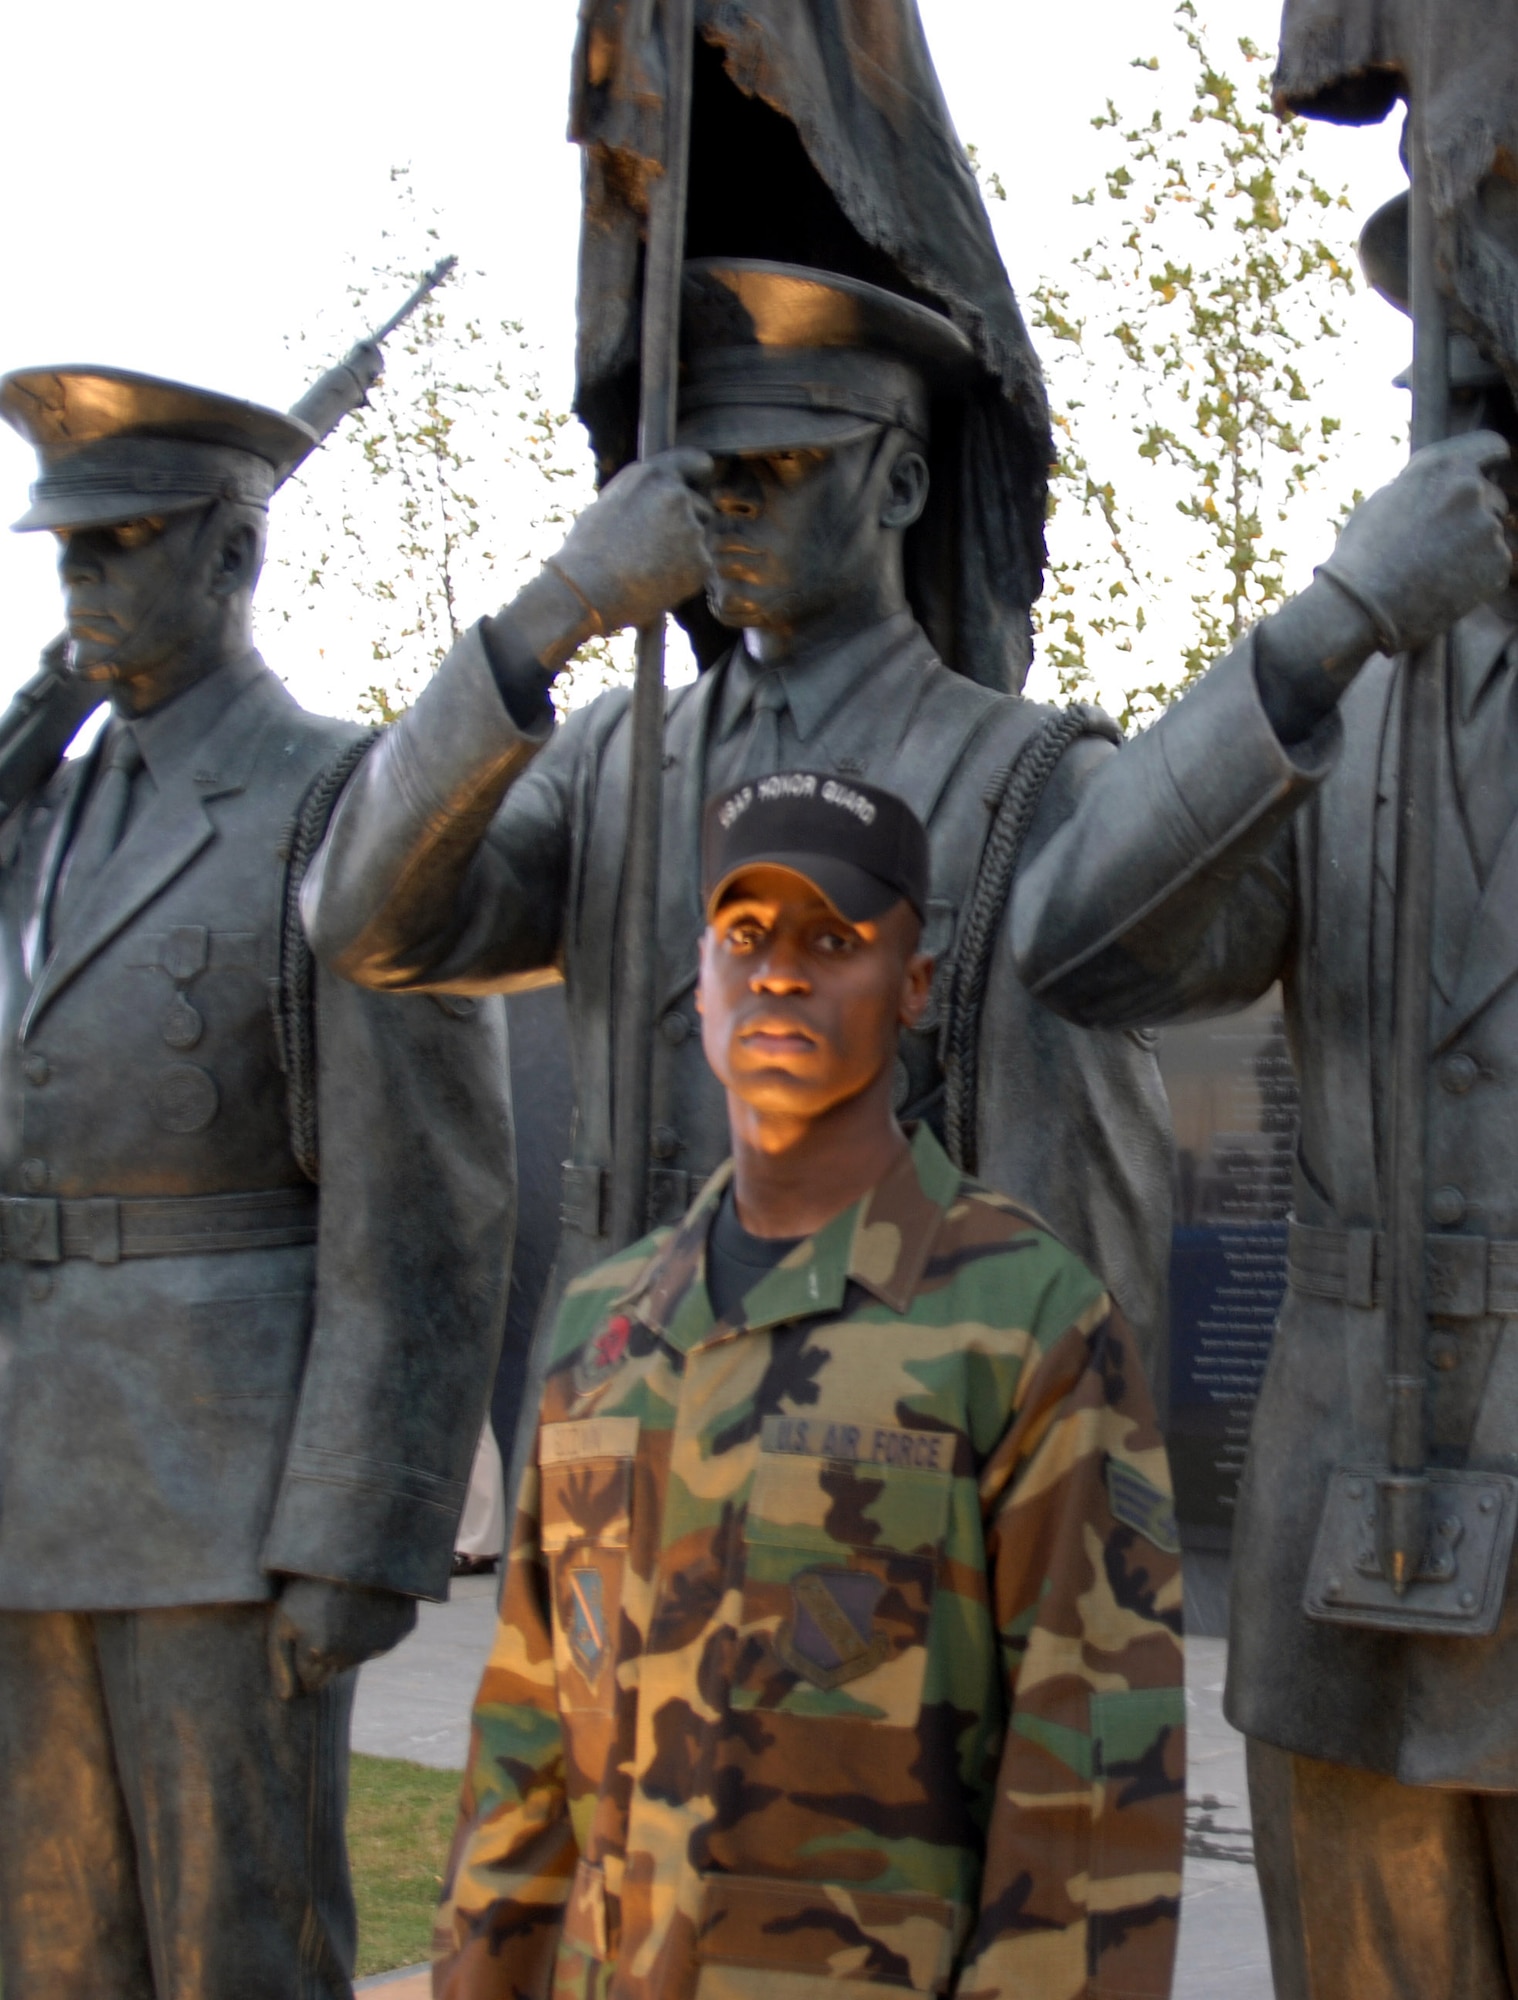 Senior Airman Michael Goodwin stands in front of the Air Force Honor Guard statue he was used as a model for, which now resides at the Air Force Memorial.  (U.S. Air Force photo/Senior Airman David Merrick)